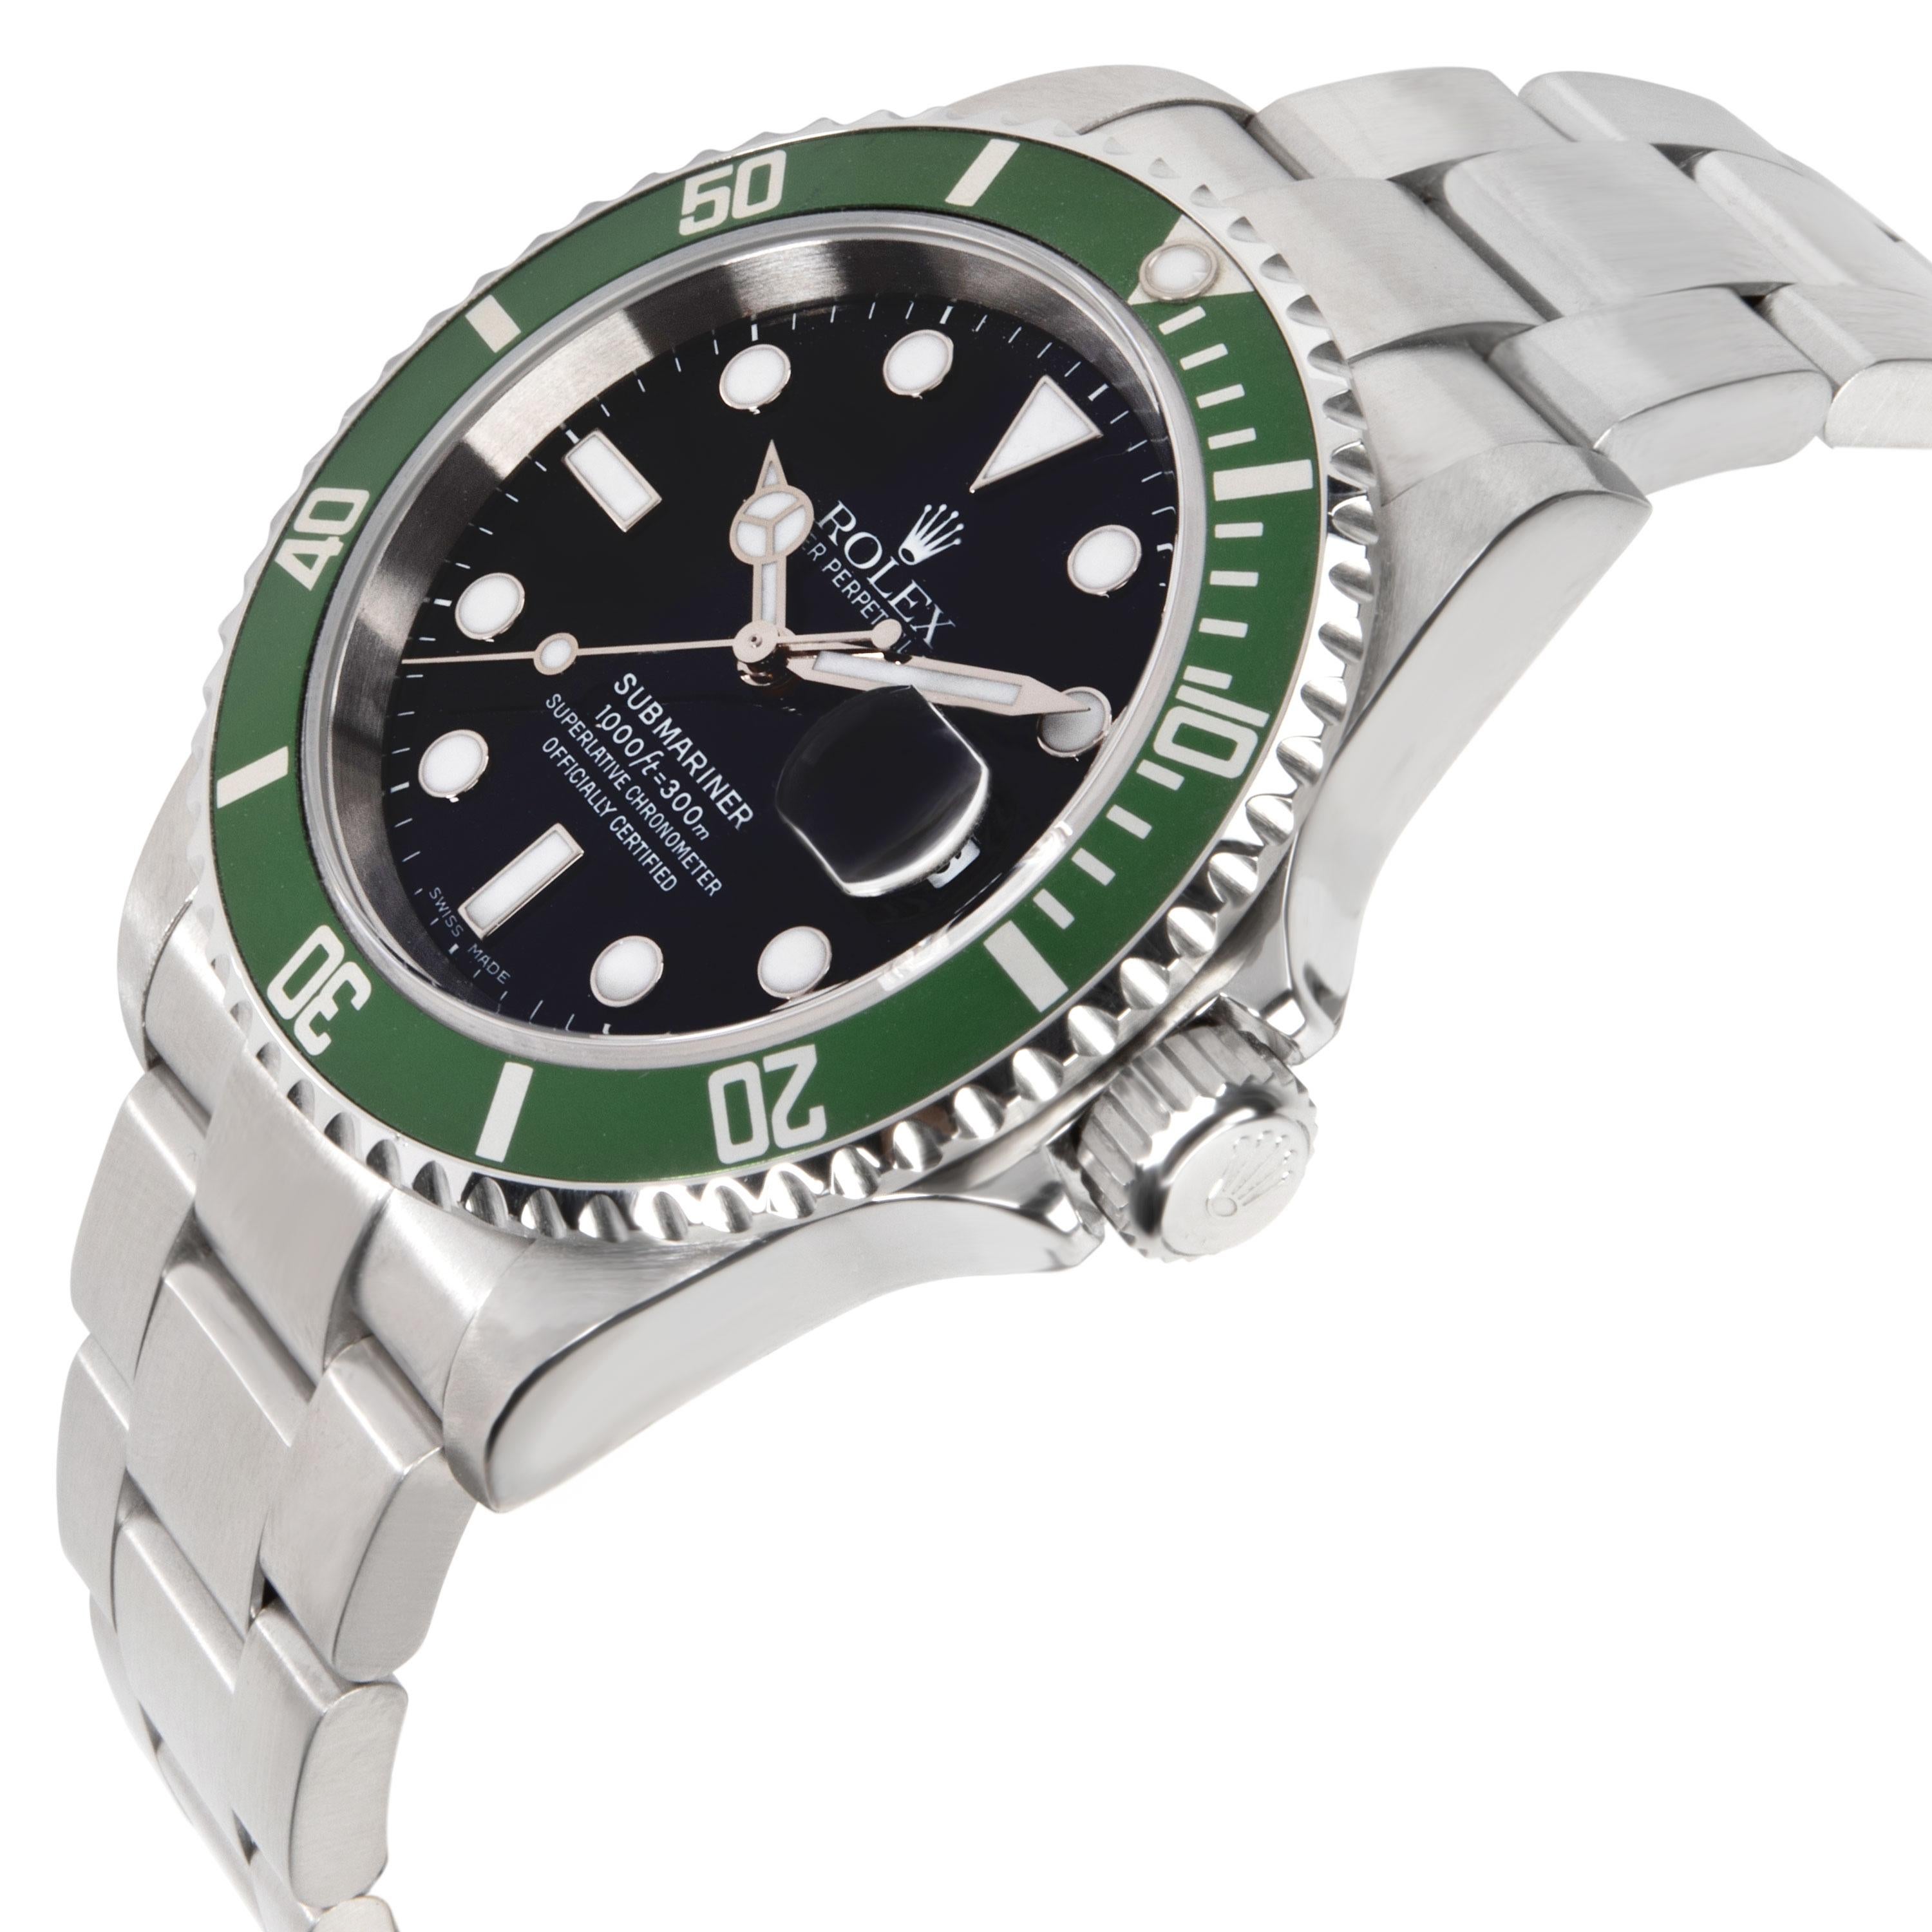 Rolex Submariner 16610V Kermit Men's Watch in Stainless Steel

SKU: 105541

PRIMARY DETAILS
Brand:  Rolex
Model: Submariner
Country of Origin: Switzerland
Movement Type: Mechanical: Automatic/Kinetic
Refurbished Notes: Overhaul, Refinish, WR